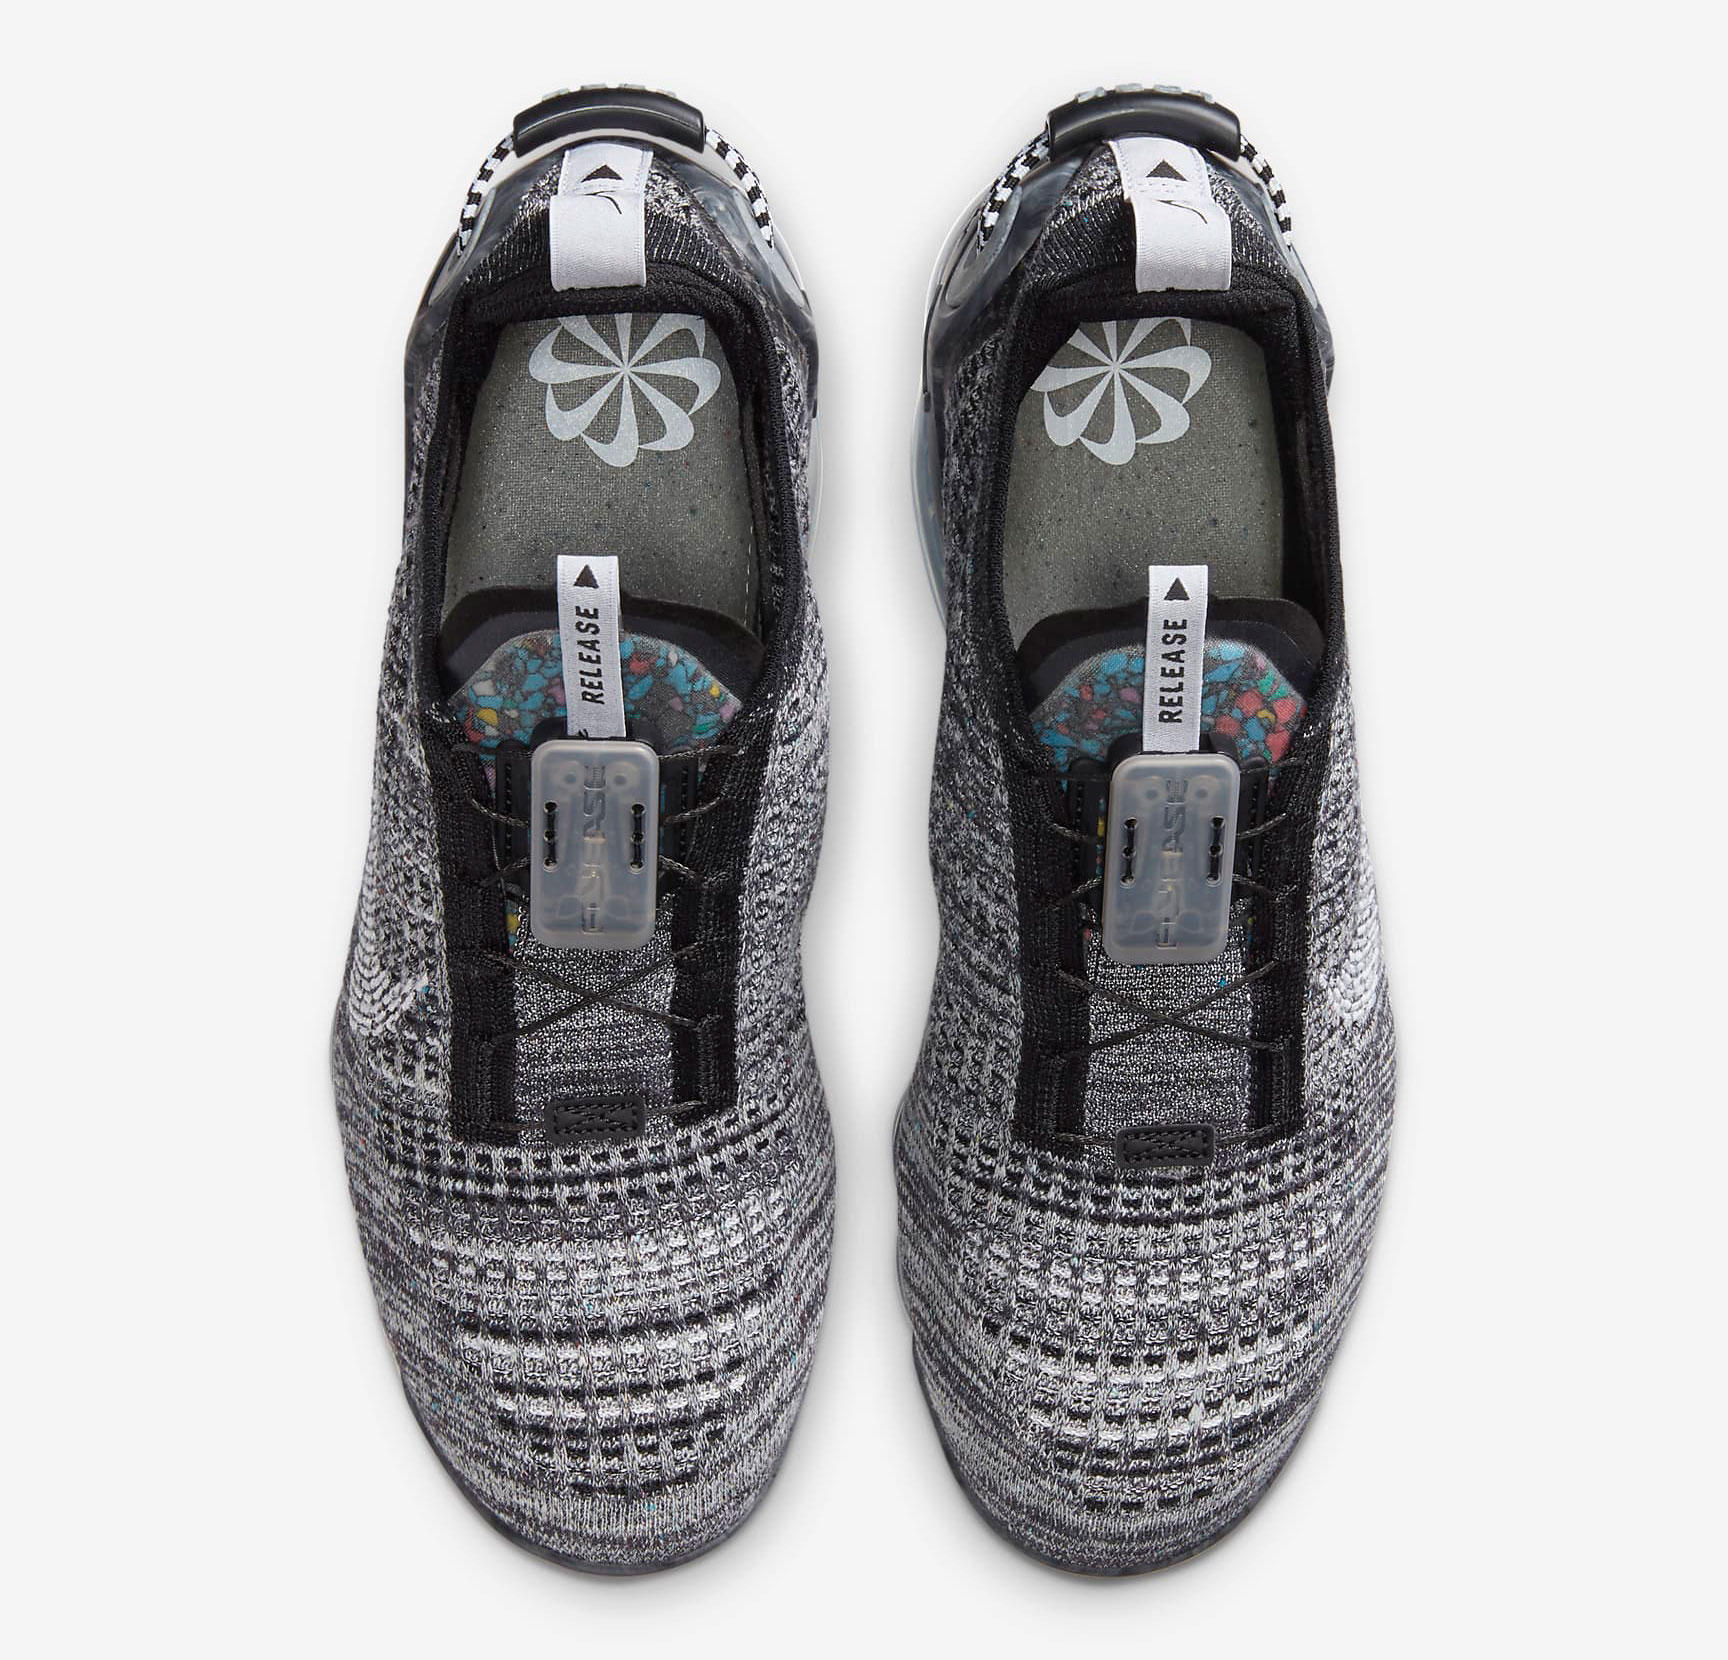 nike dress air vapormax flyknit 2020 oreo release date price 4